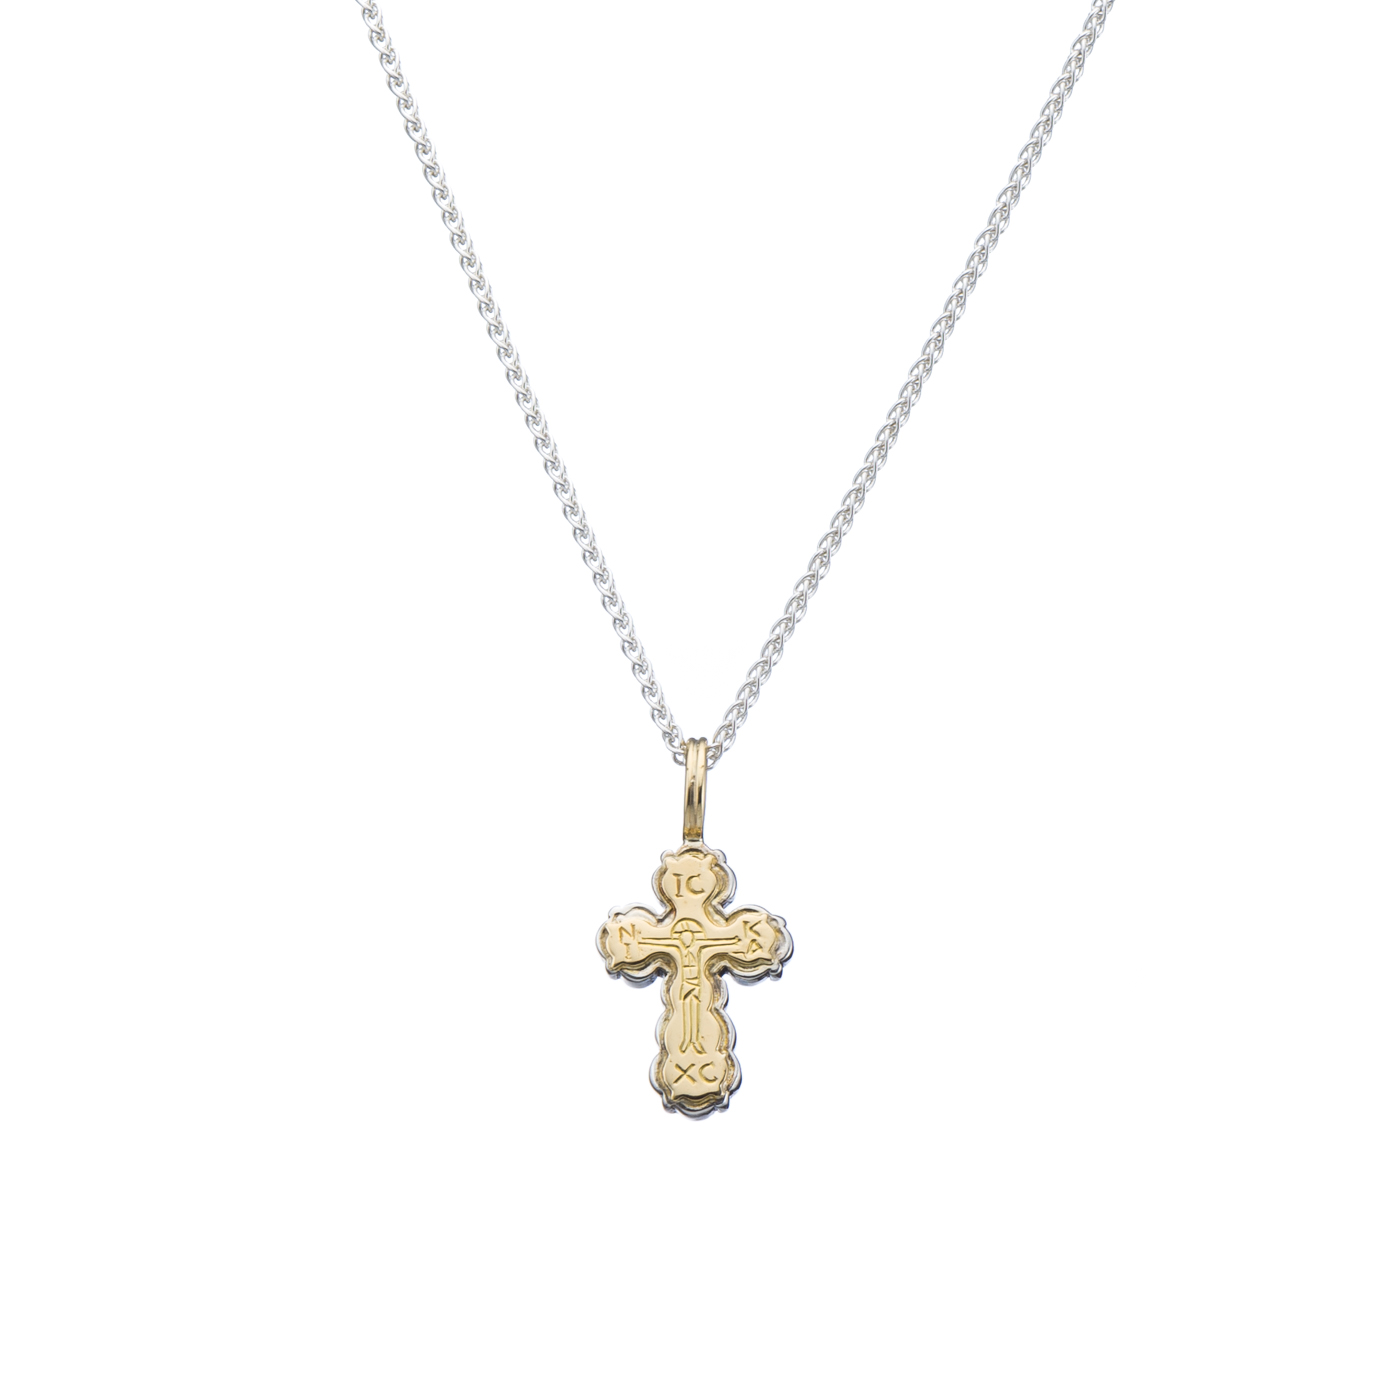 Tiny Byzantine cross in 18K Gold and Sterling Silver